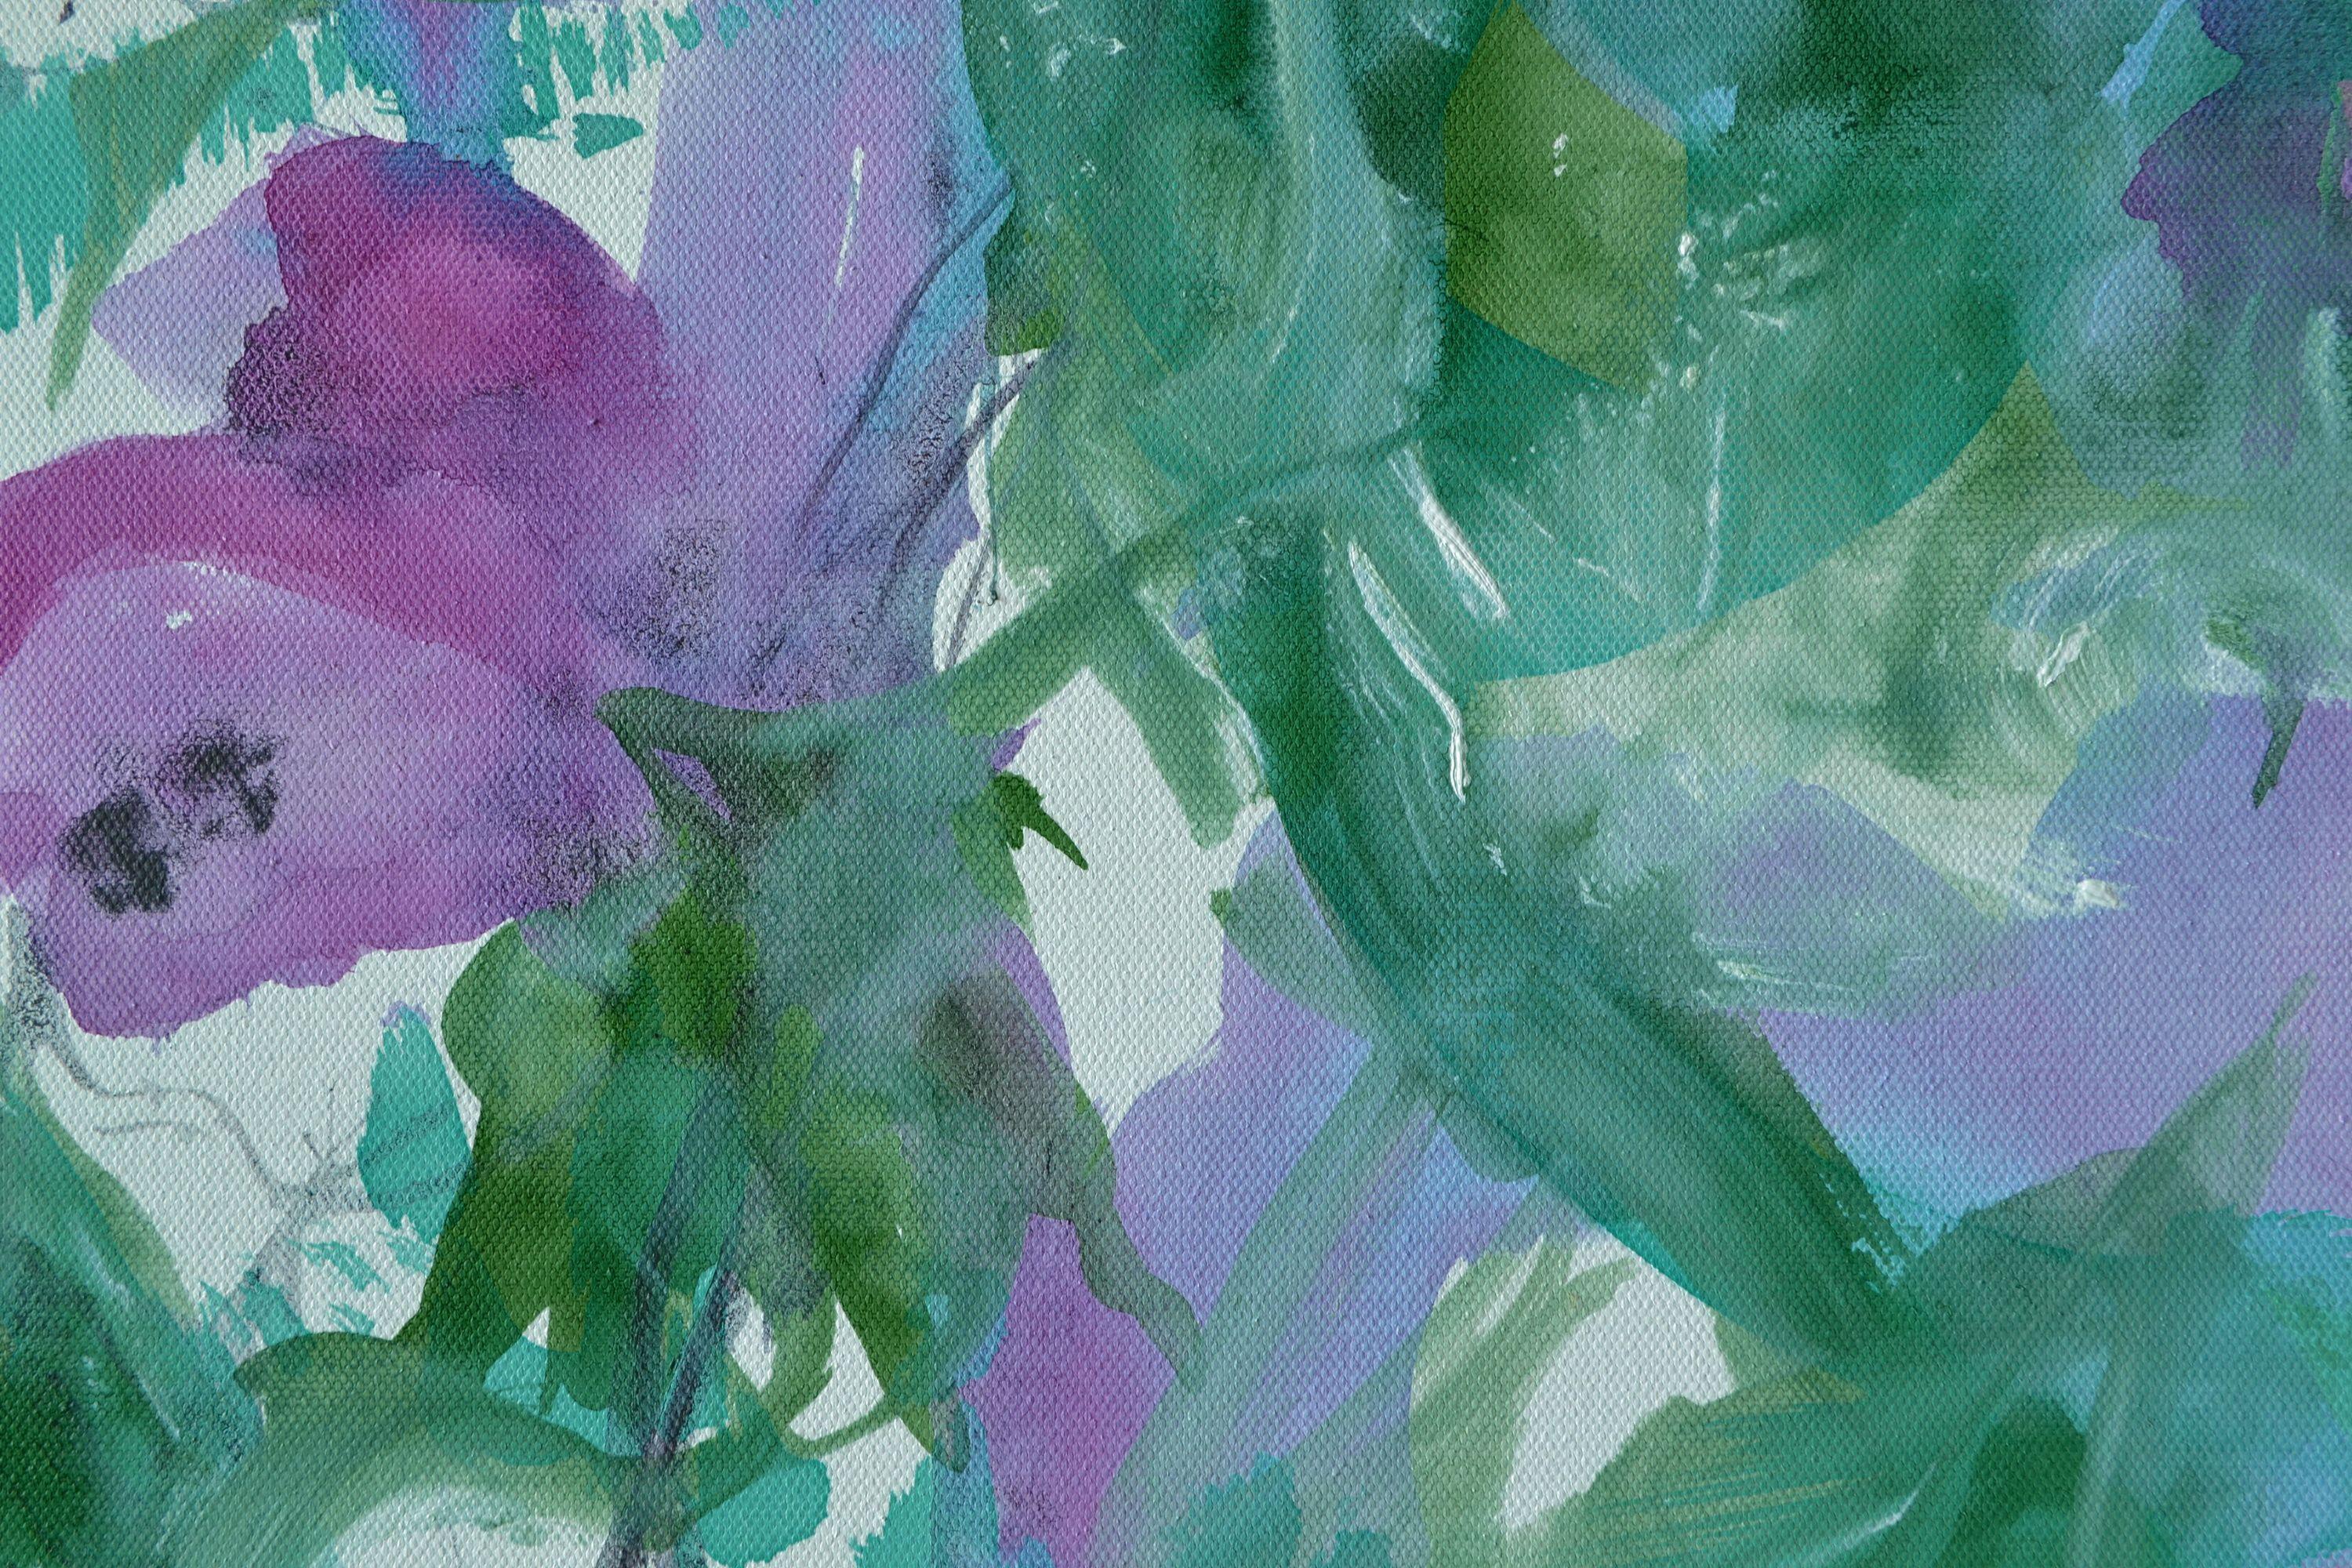 A work inspired by spring and fresh flowers with a happy, optimistic feel to it.     The sides are not painted, they show traces the paint I worked with.    This work is ready to hang, no frame is needed.    40 x 60 x 1.8 cm /15.7 x 23.6 x 0.7 in   